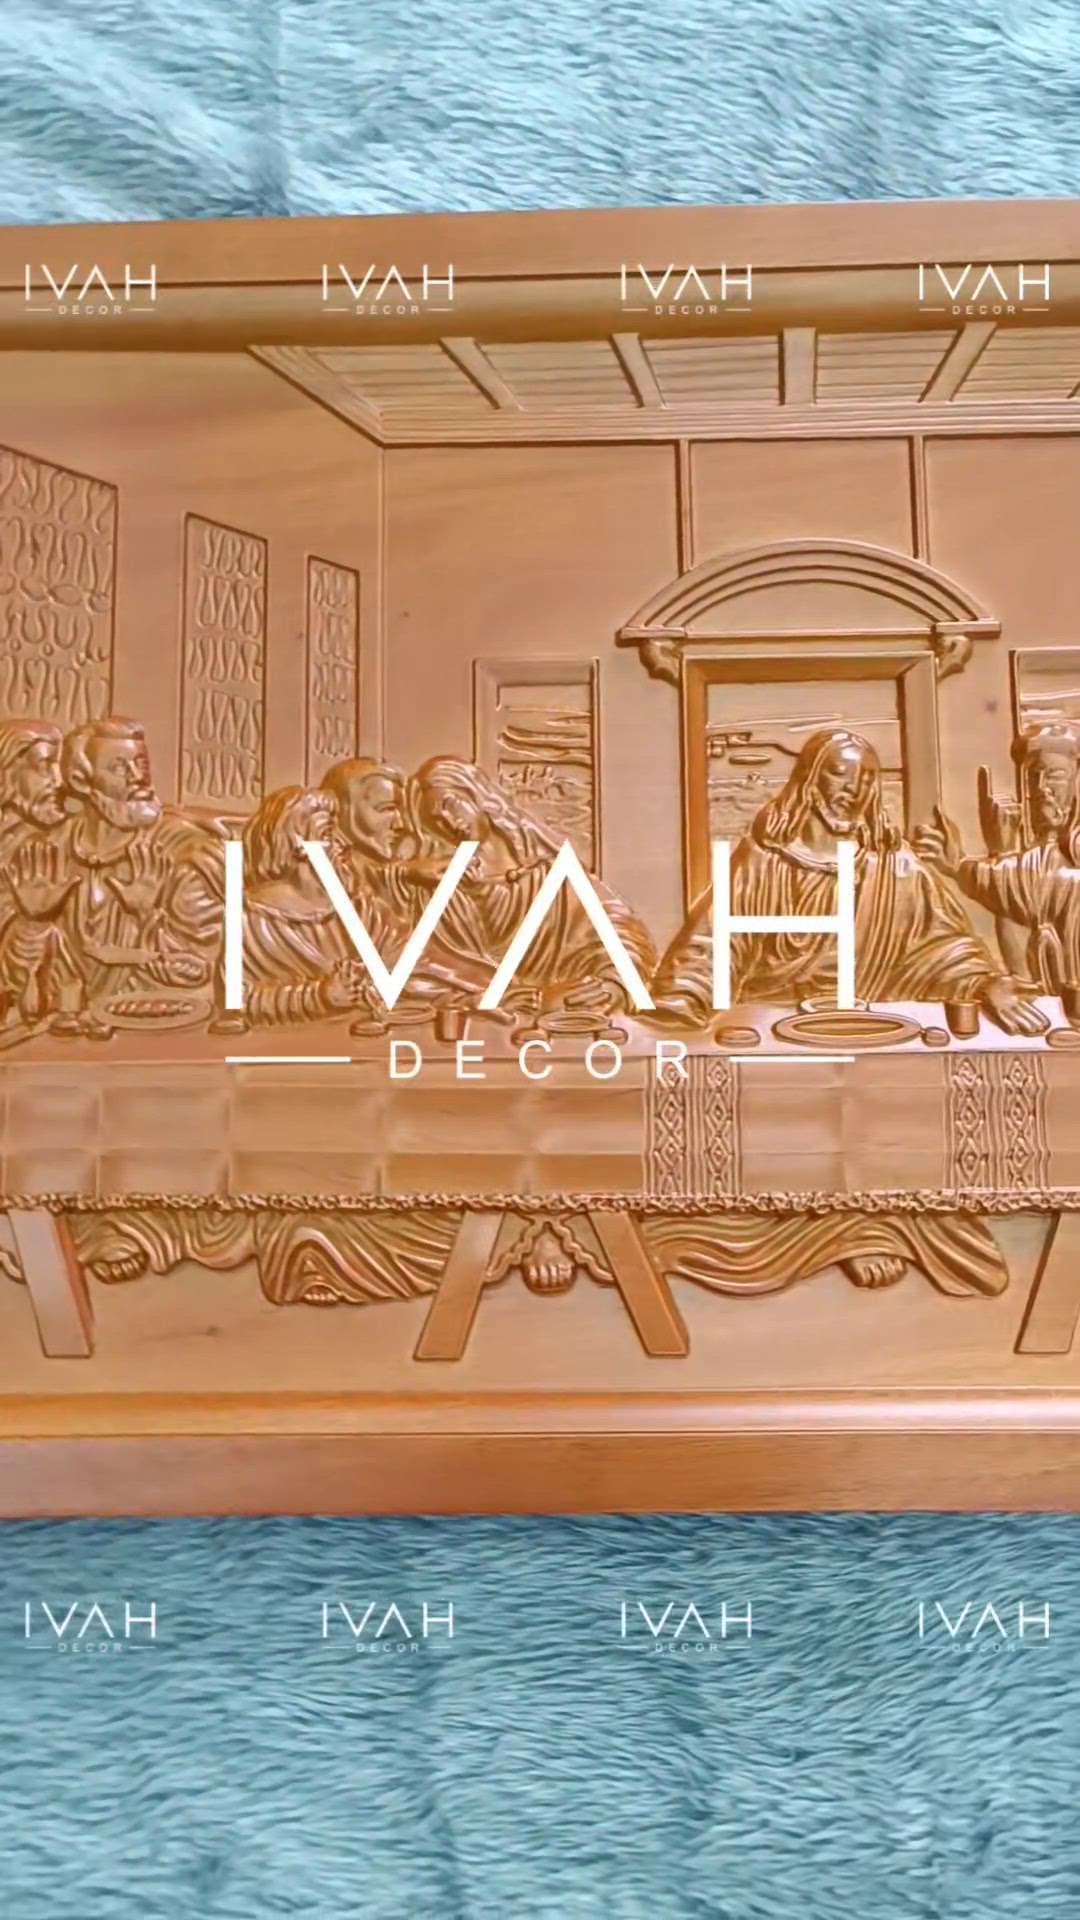 Last Supper Wood Carving in Mahagany Wood 
Size 120cm x 60cm 
For more details plz WhatsApp or DM : 0091 7561091369

#ivah #ivahdecor #lastsupperwoodcarving #jesuswoodcarving #godswoodcarving #premiumquality #premiumproducts #gift #giftideas #housewarminggift #trending #reels #church #newhome #interioideas